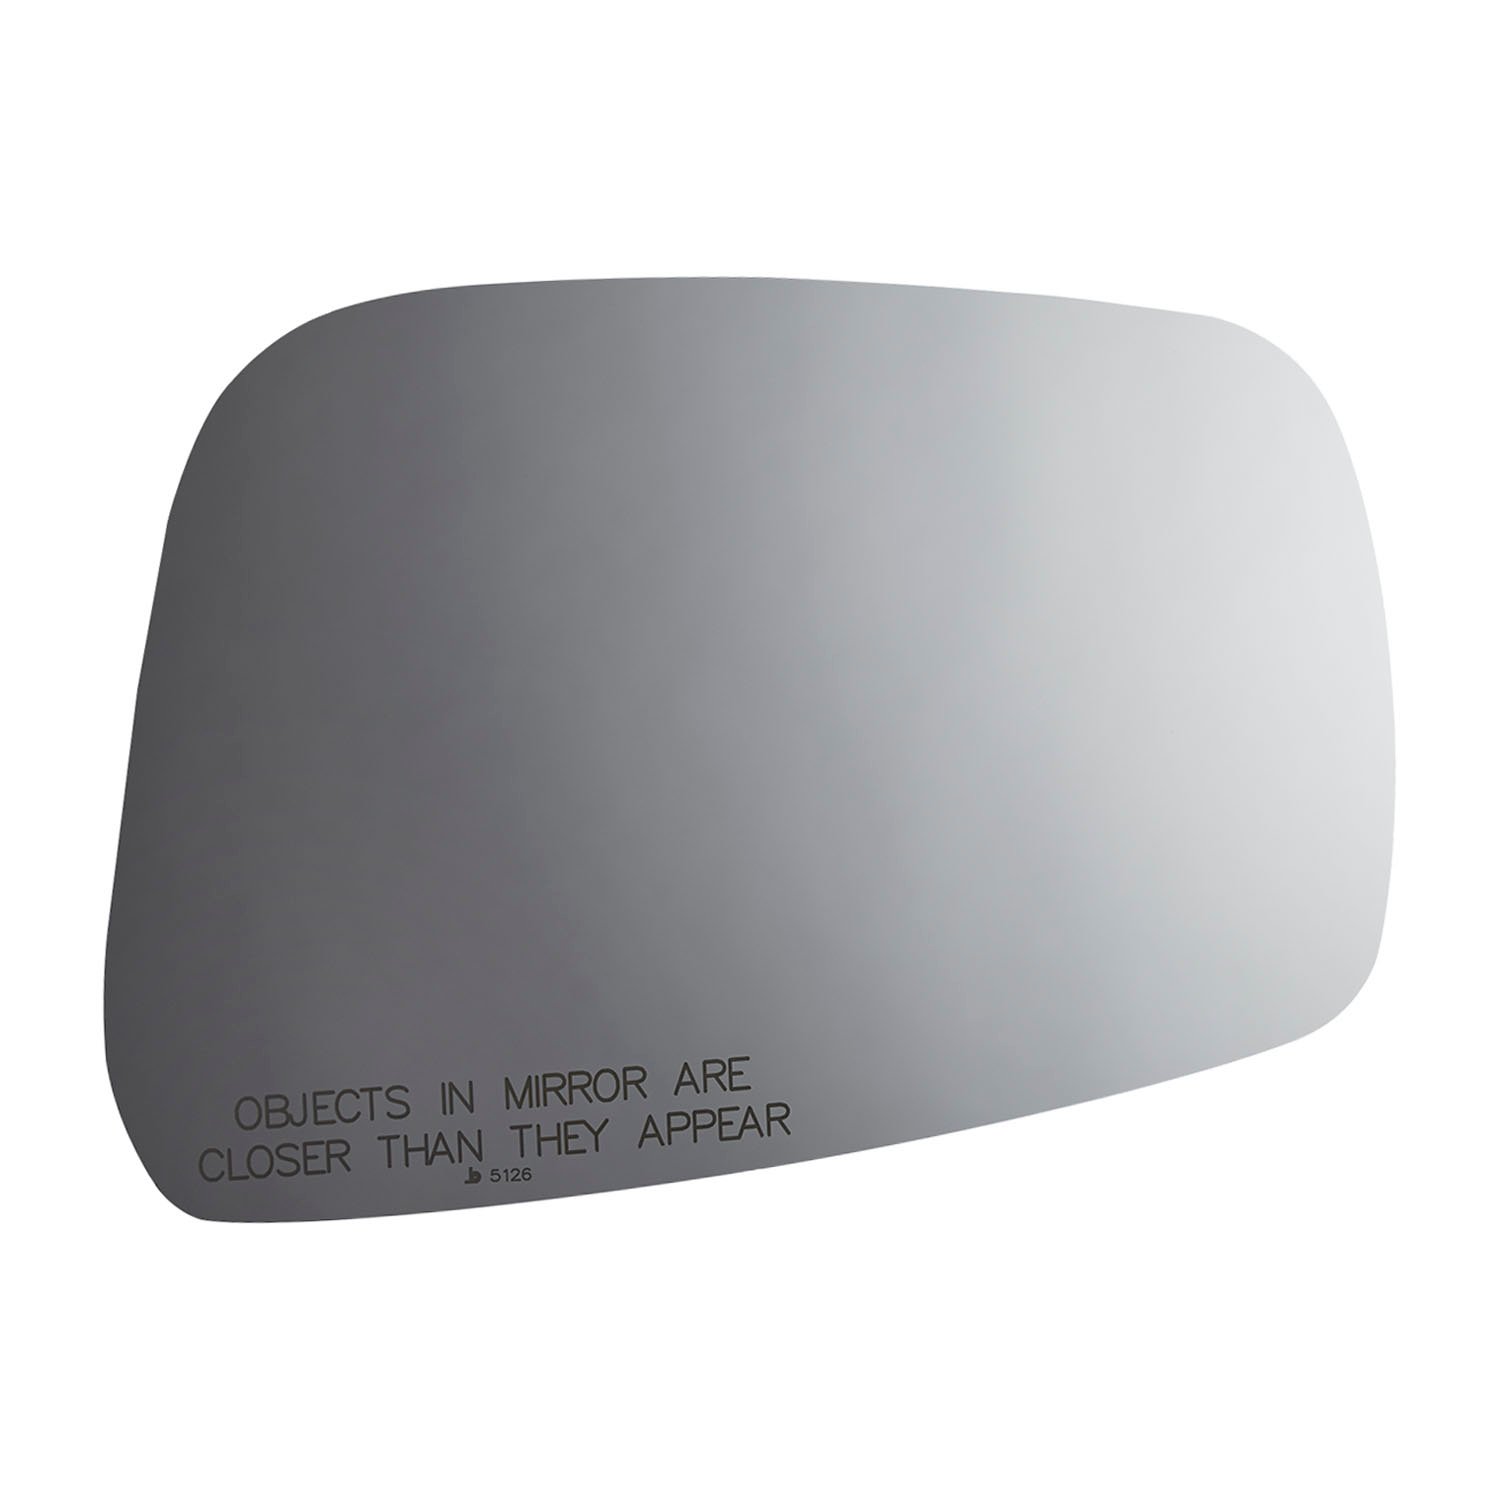 5126 SIDE VIEW MIRROR